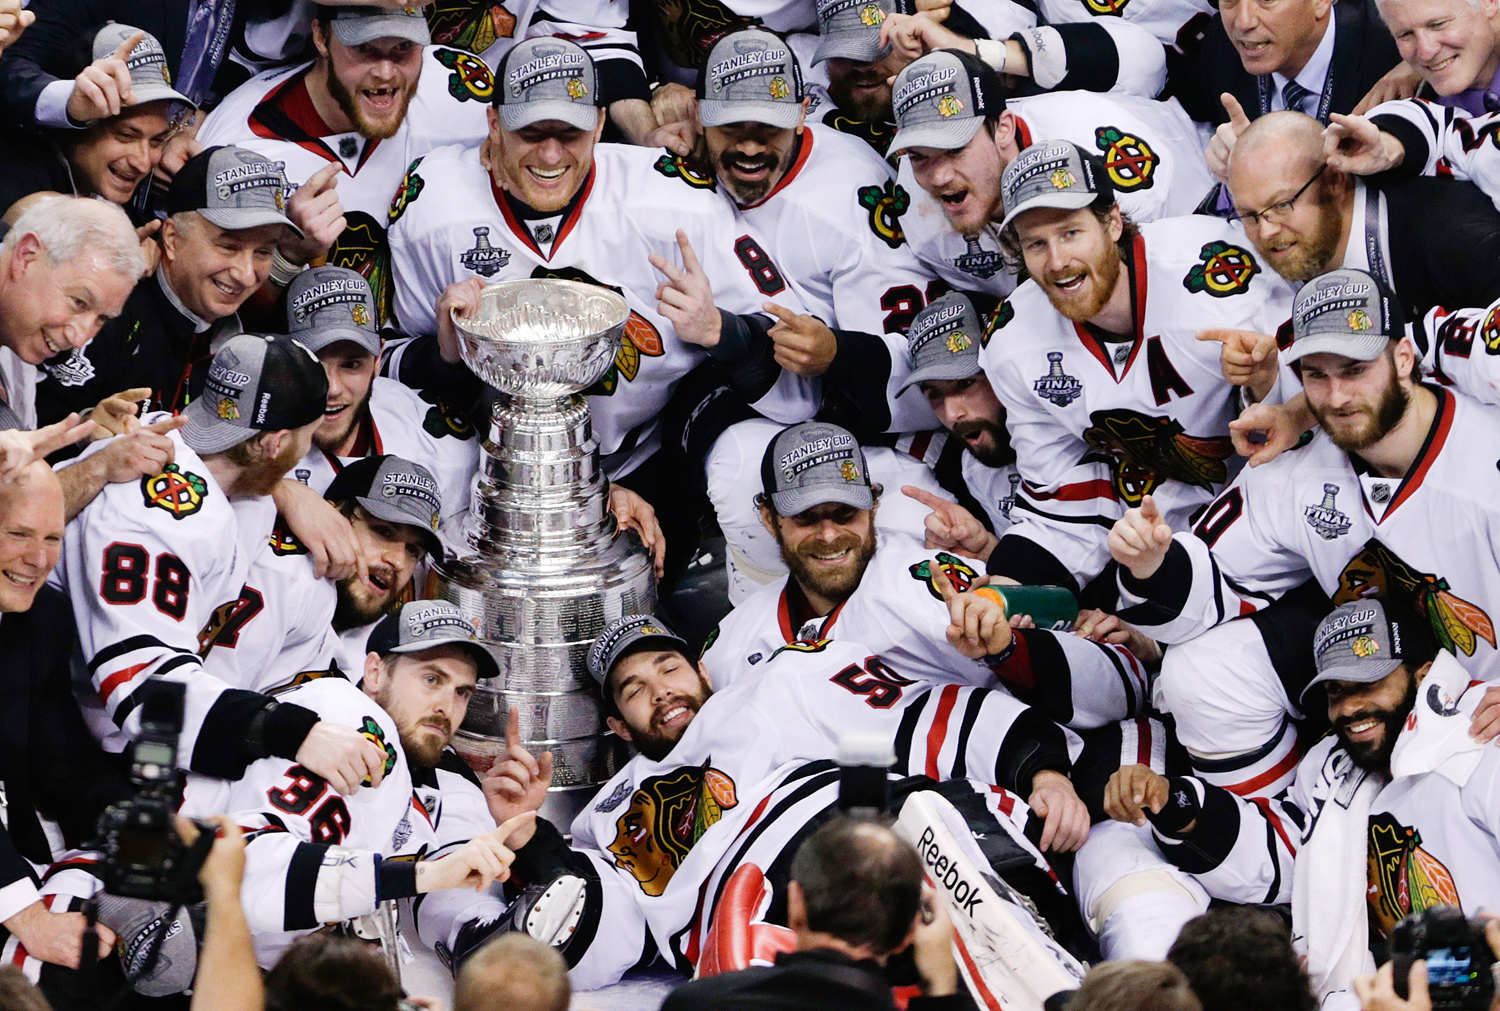 Blackhawks win Stanley Cup at home for first time in 77 years – Santa Cruz  Sentinel